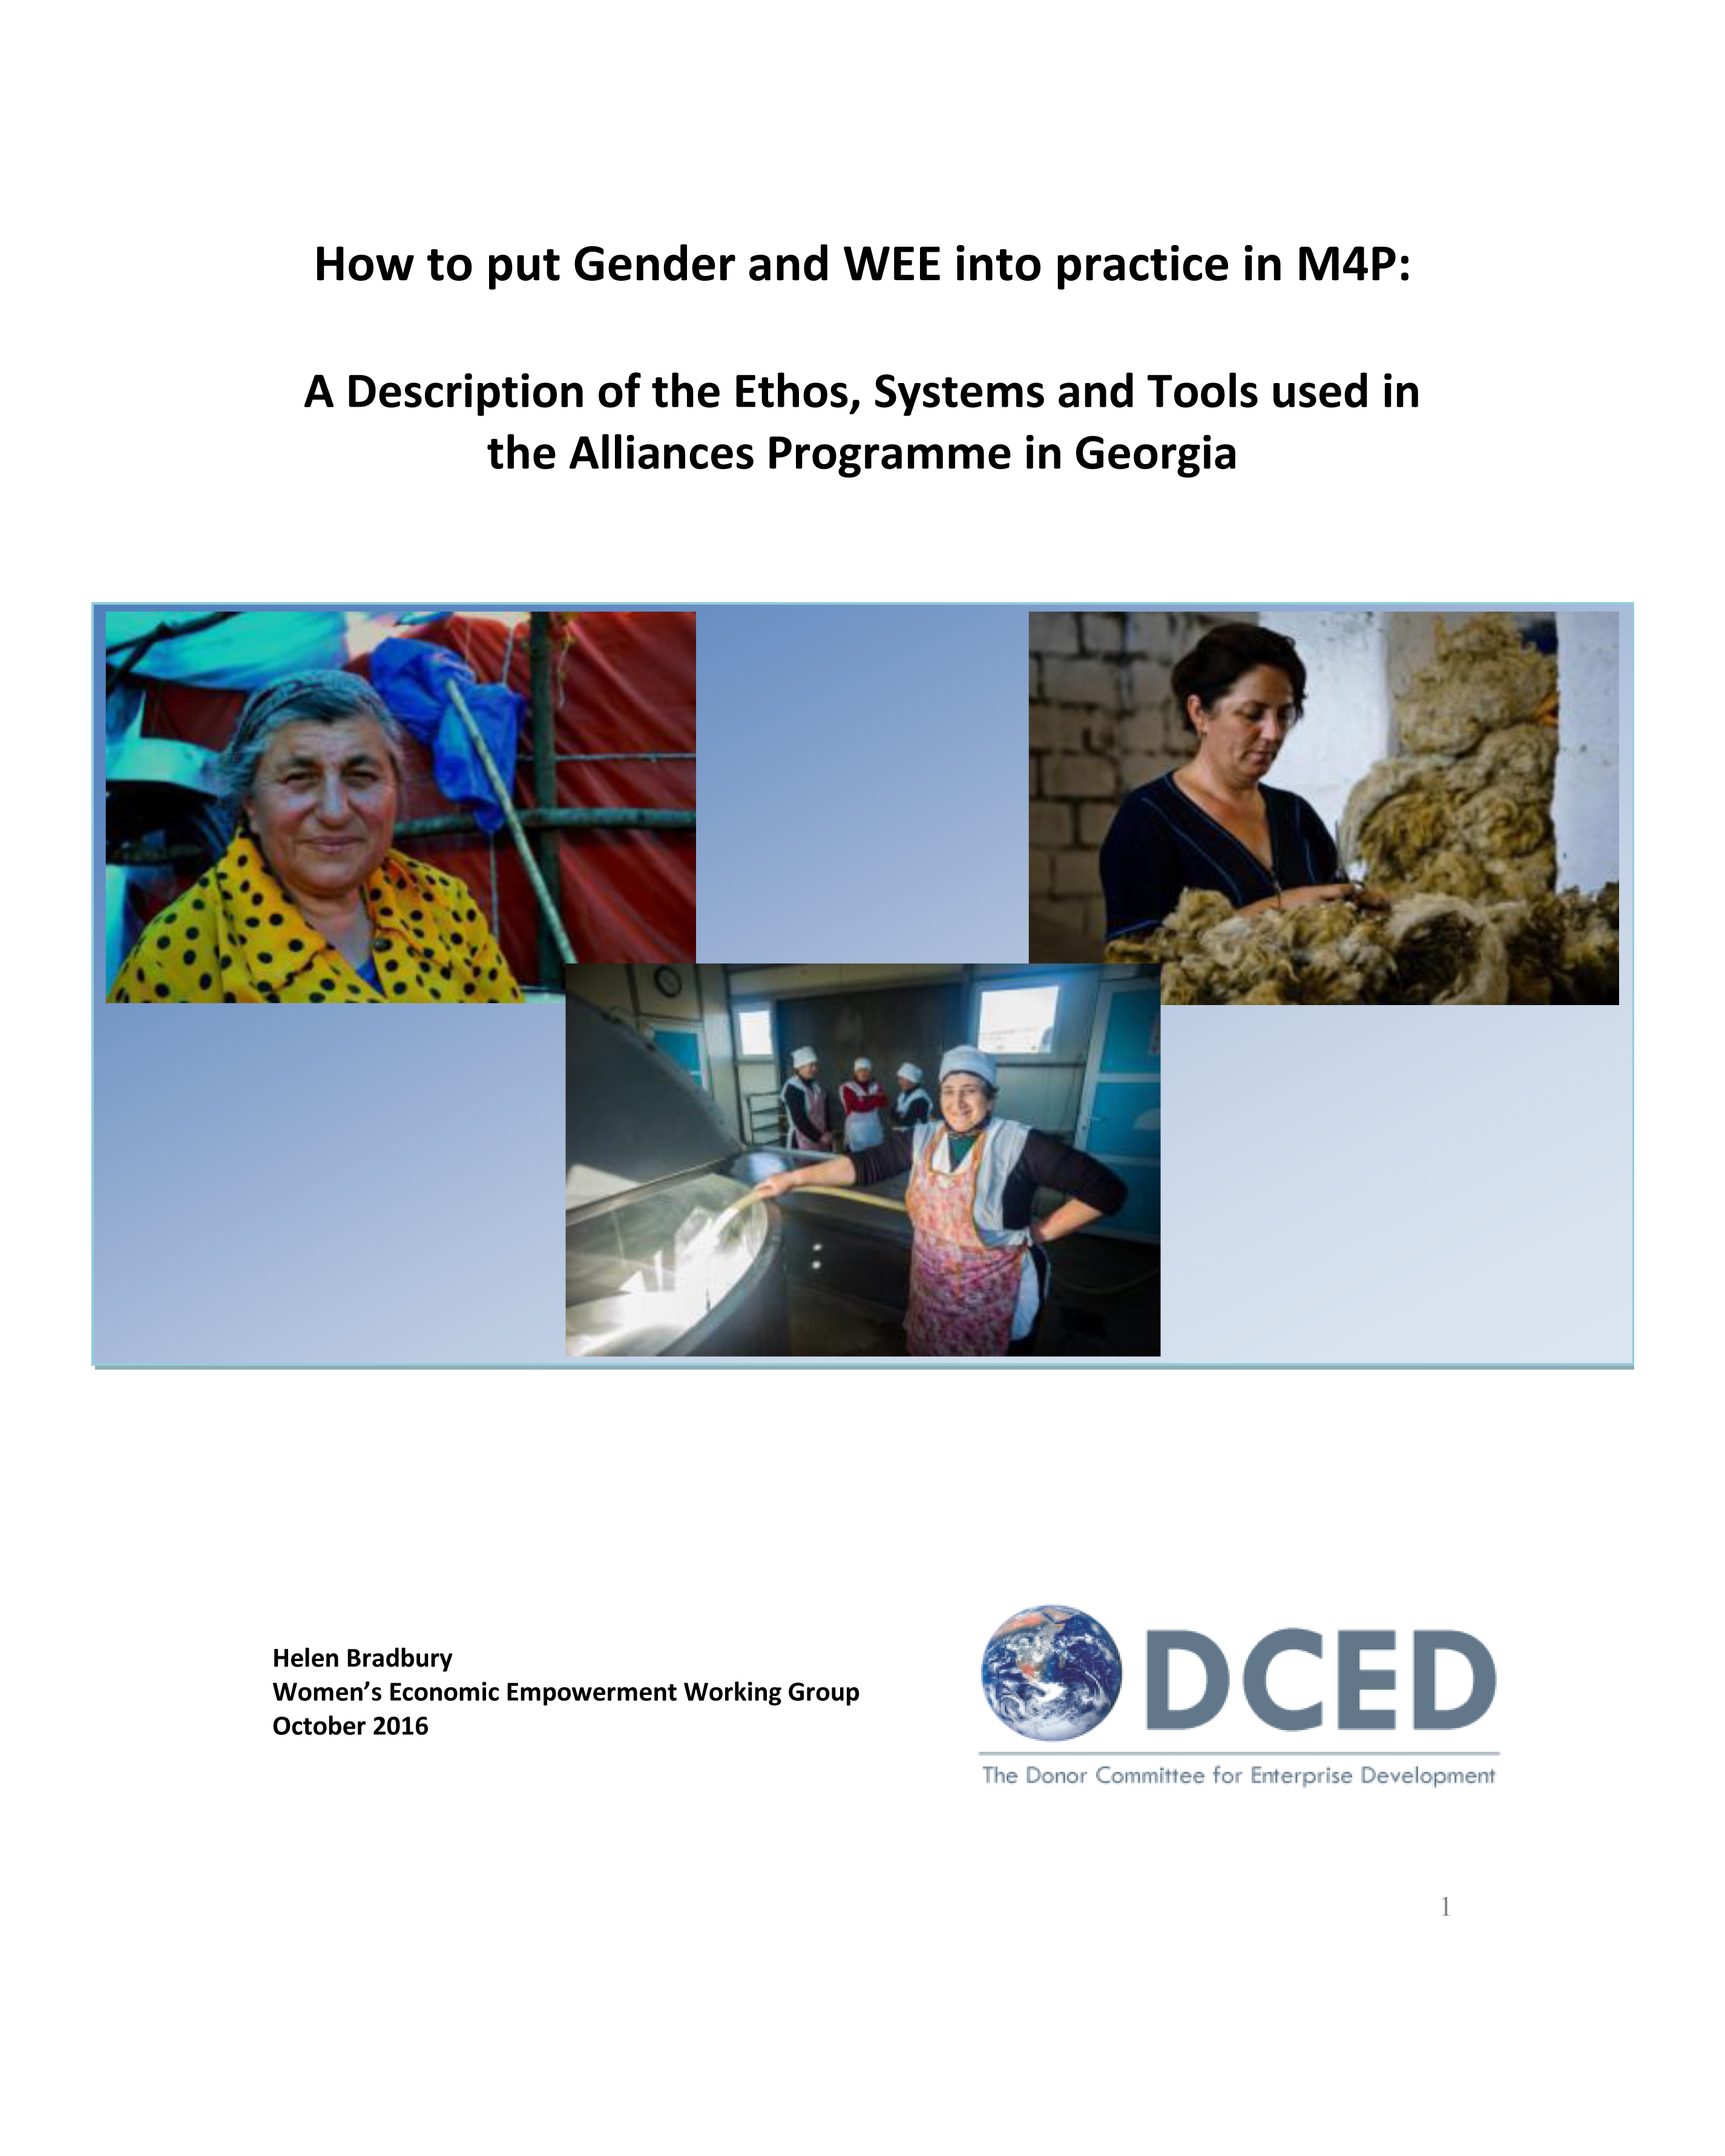 How to put Gender and WEE into practice in M4P 